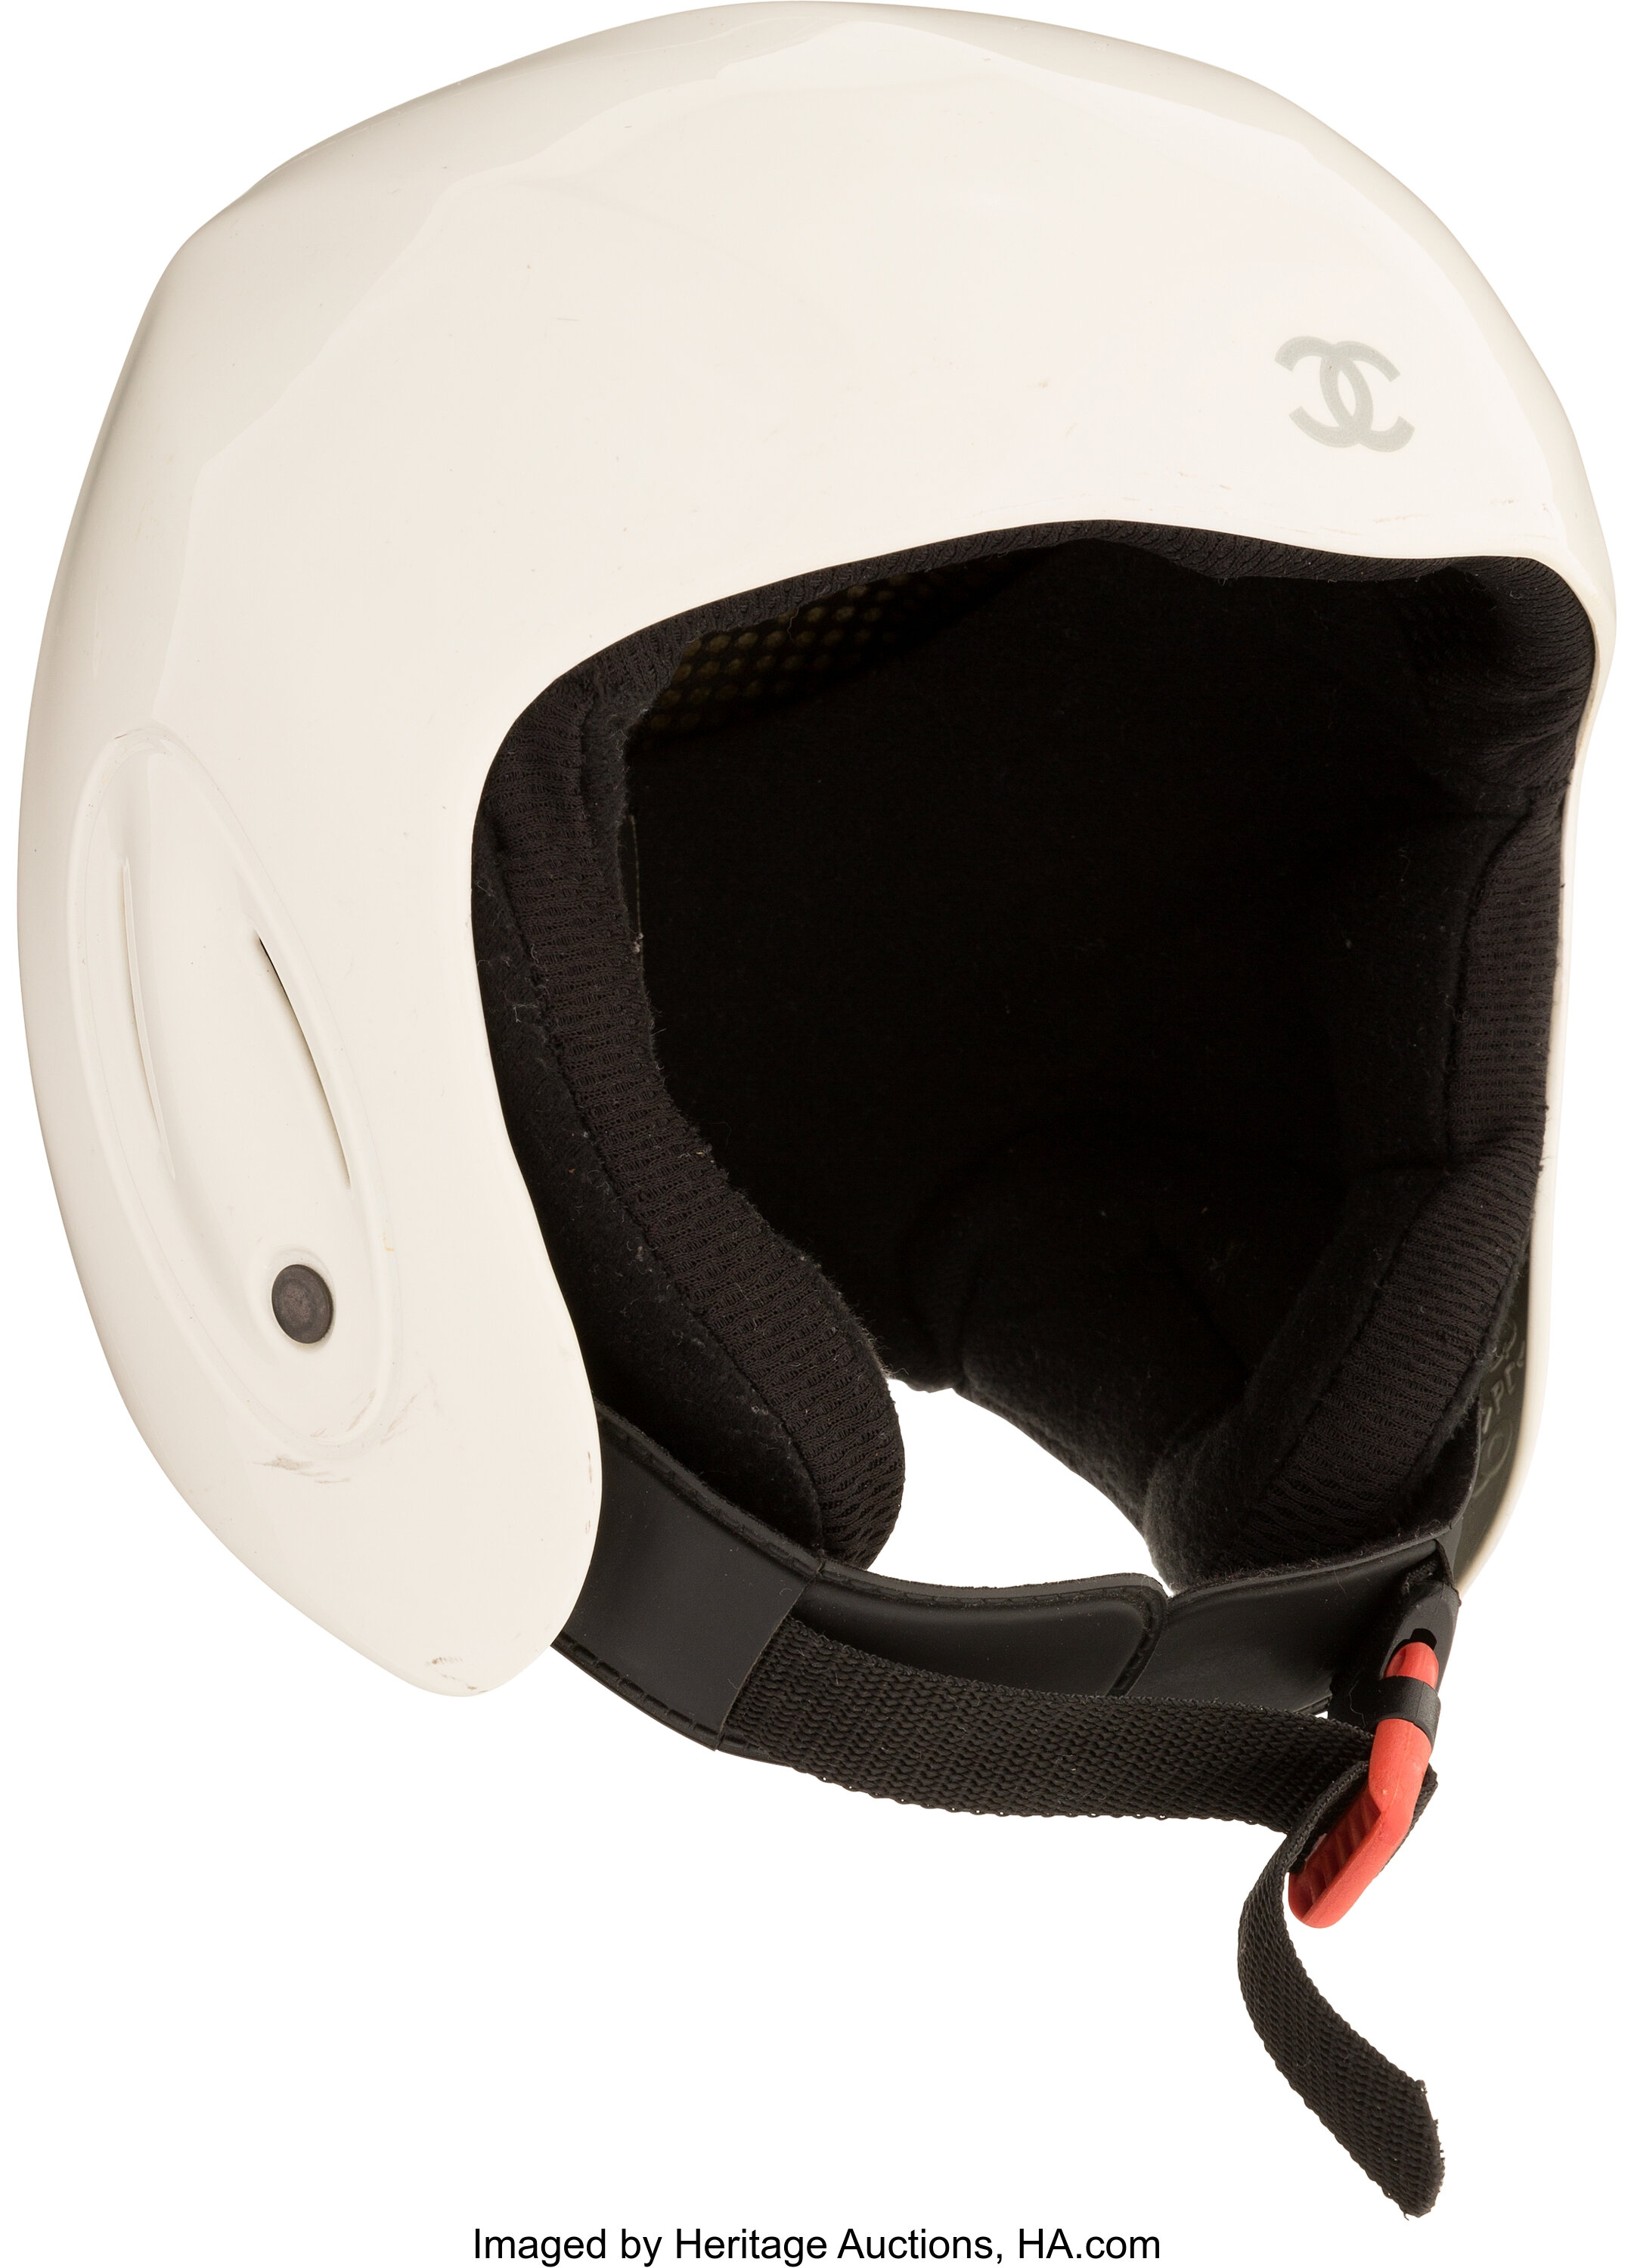 Chanel Limited Edition White PVC Snowboard Helmet. Condition: 3